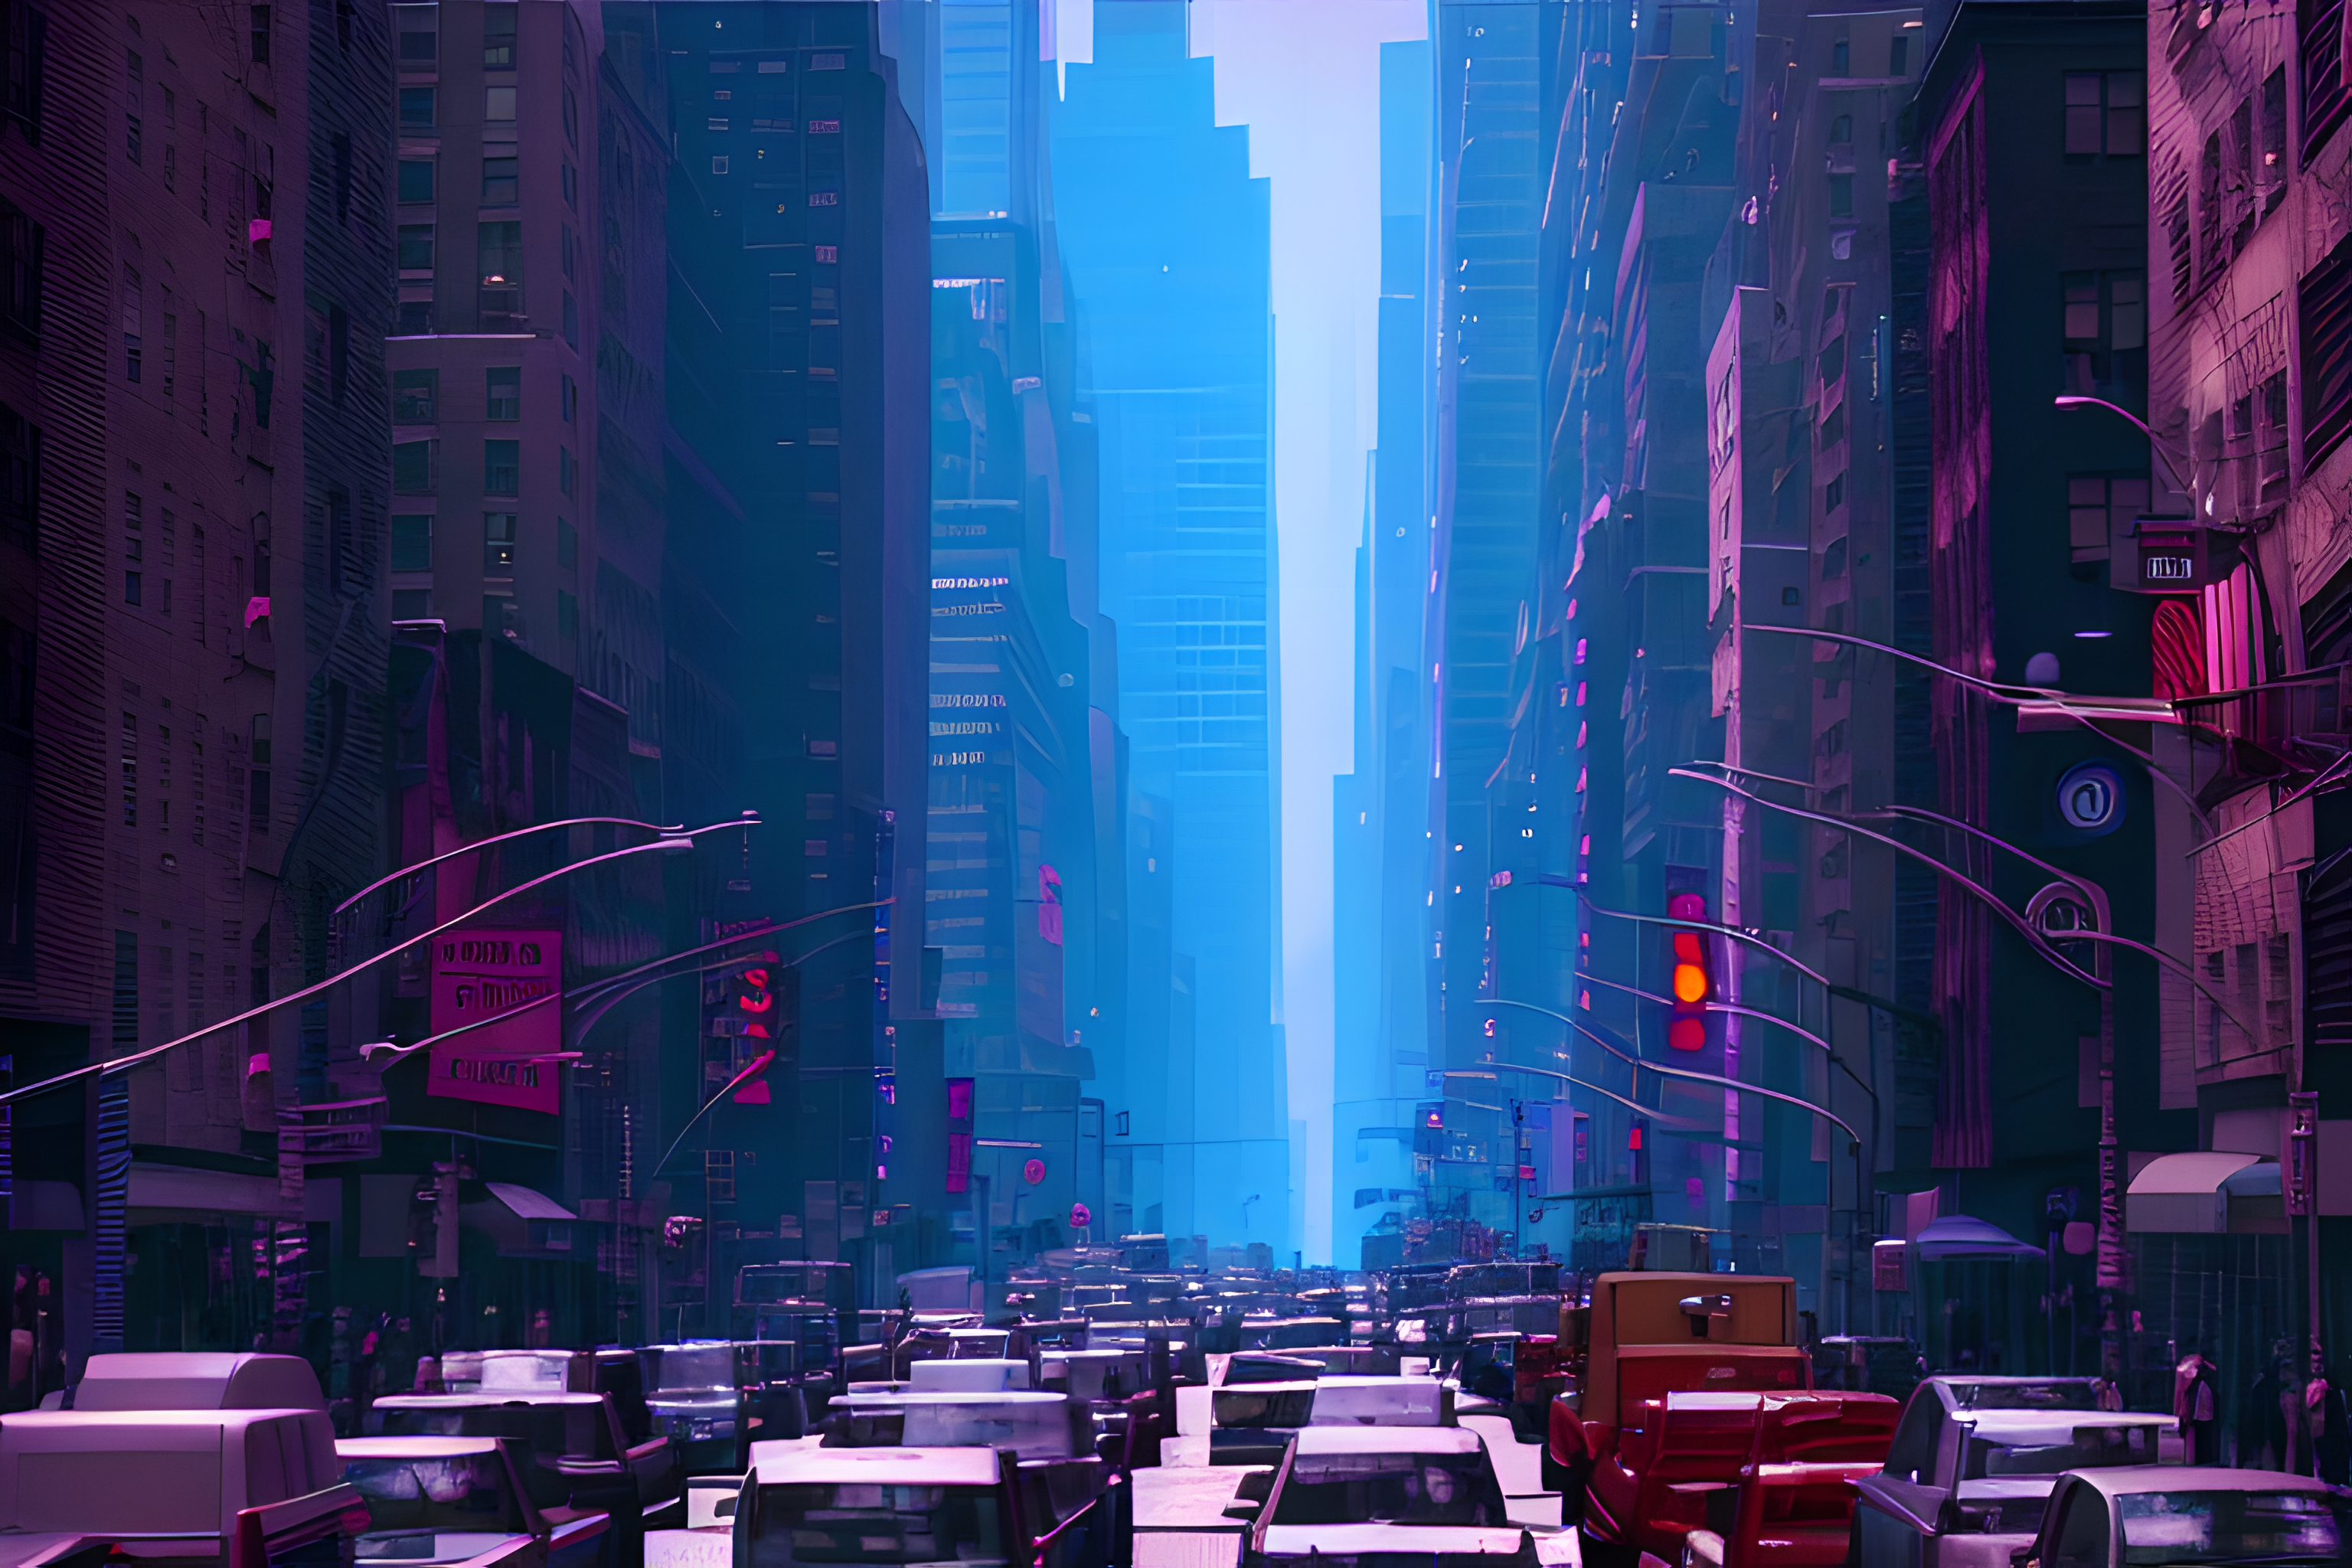 Spider-Verse, spiderverse, Spider-Man: Into the Spider-Verse, Spiderman  Miles Morales, New York City, Stable Diffusion, city, car, traffic, AI art,  Brooklyn | 3072x2048 Wallpaper - wallhaven.cc